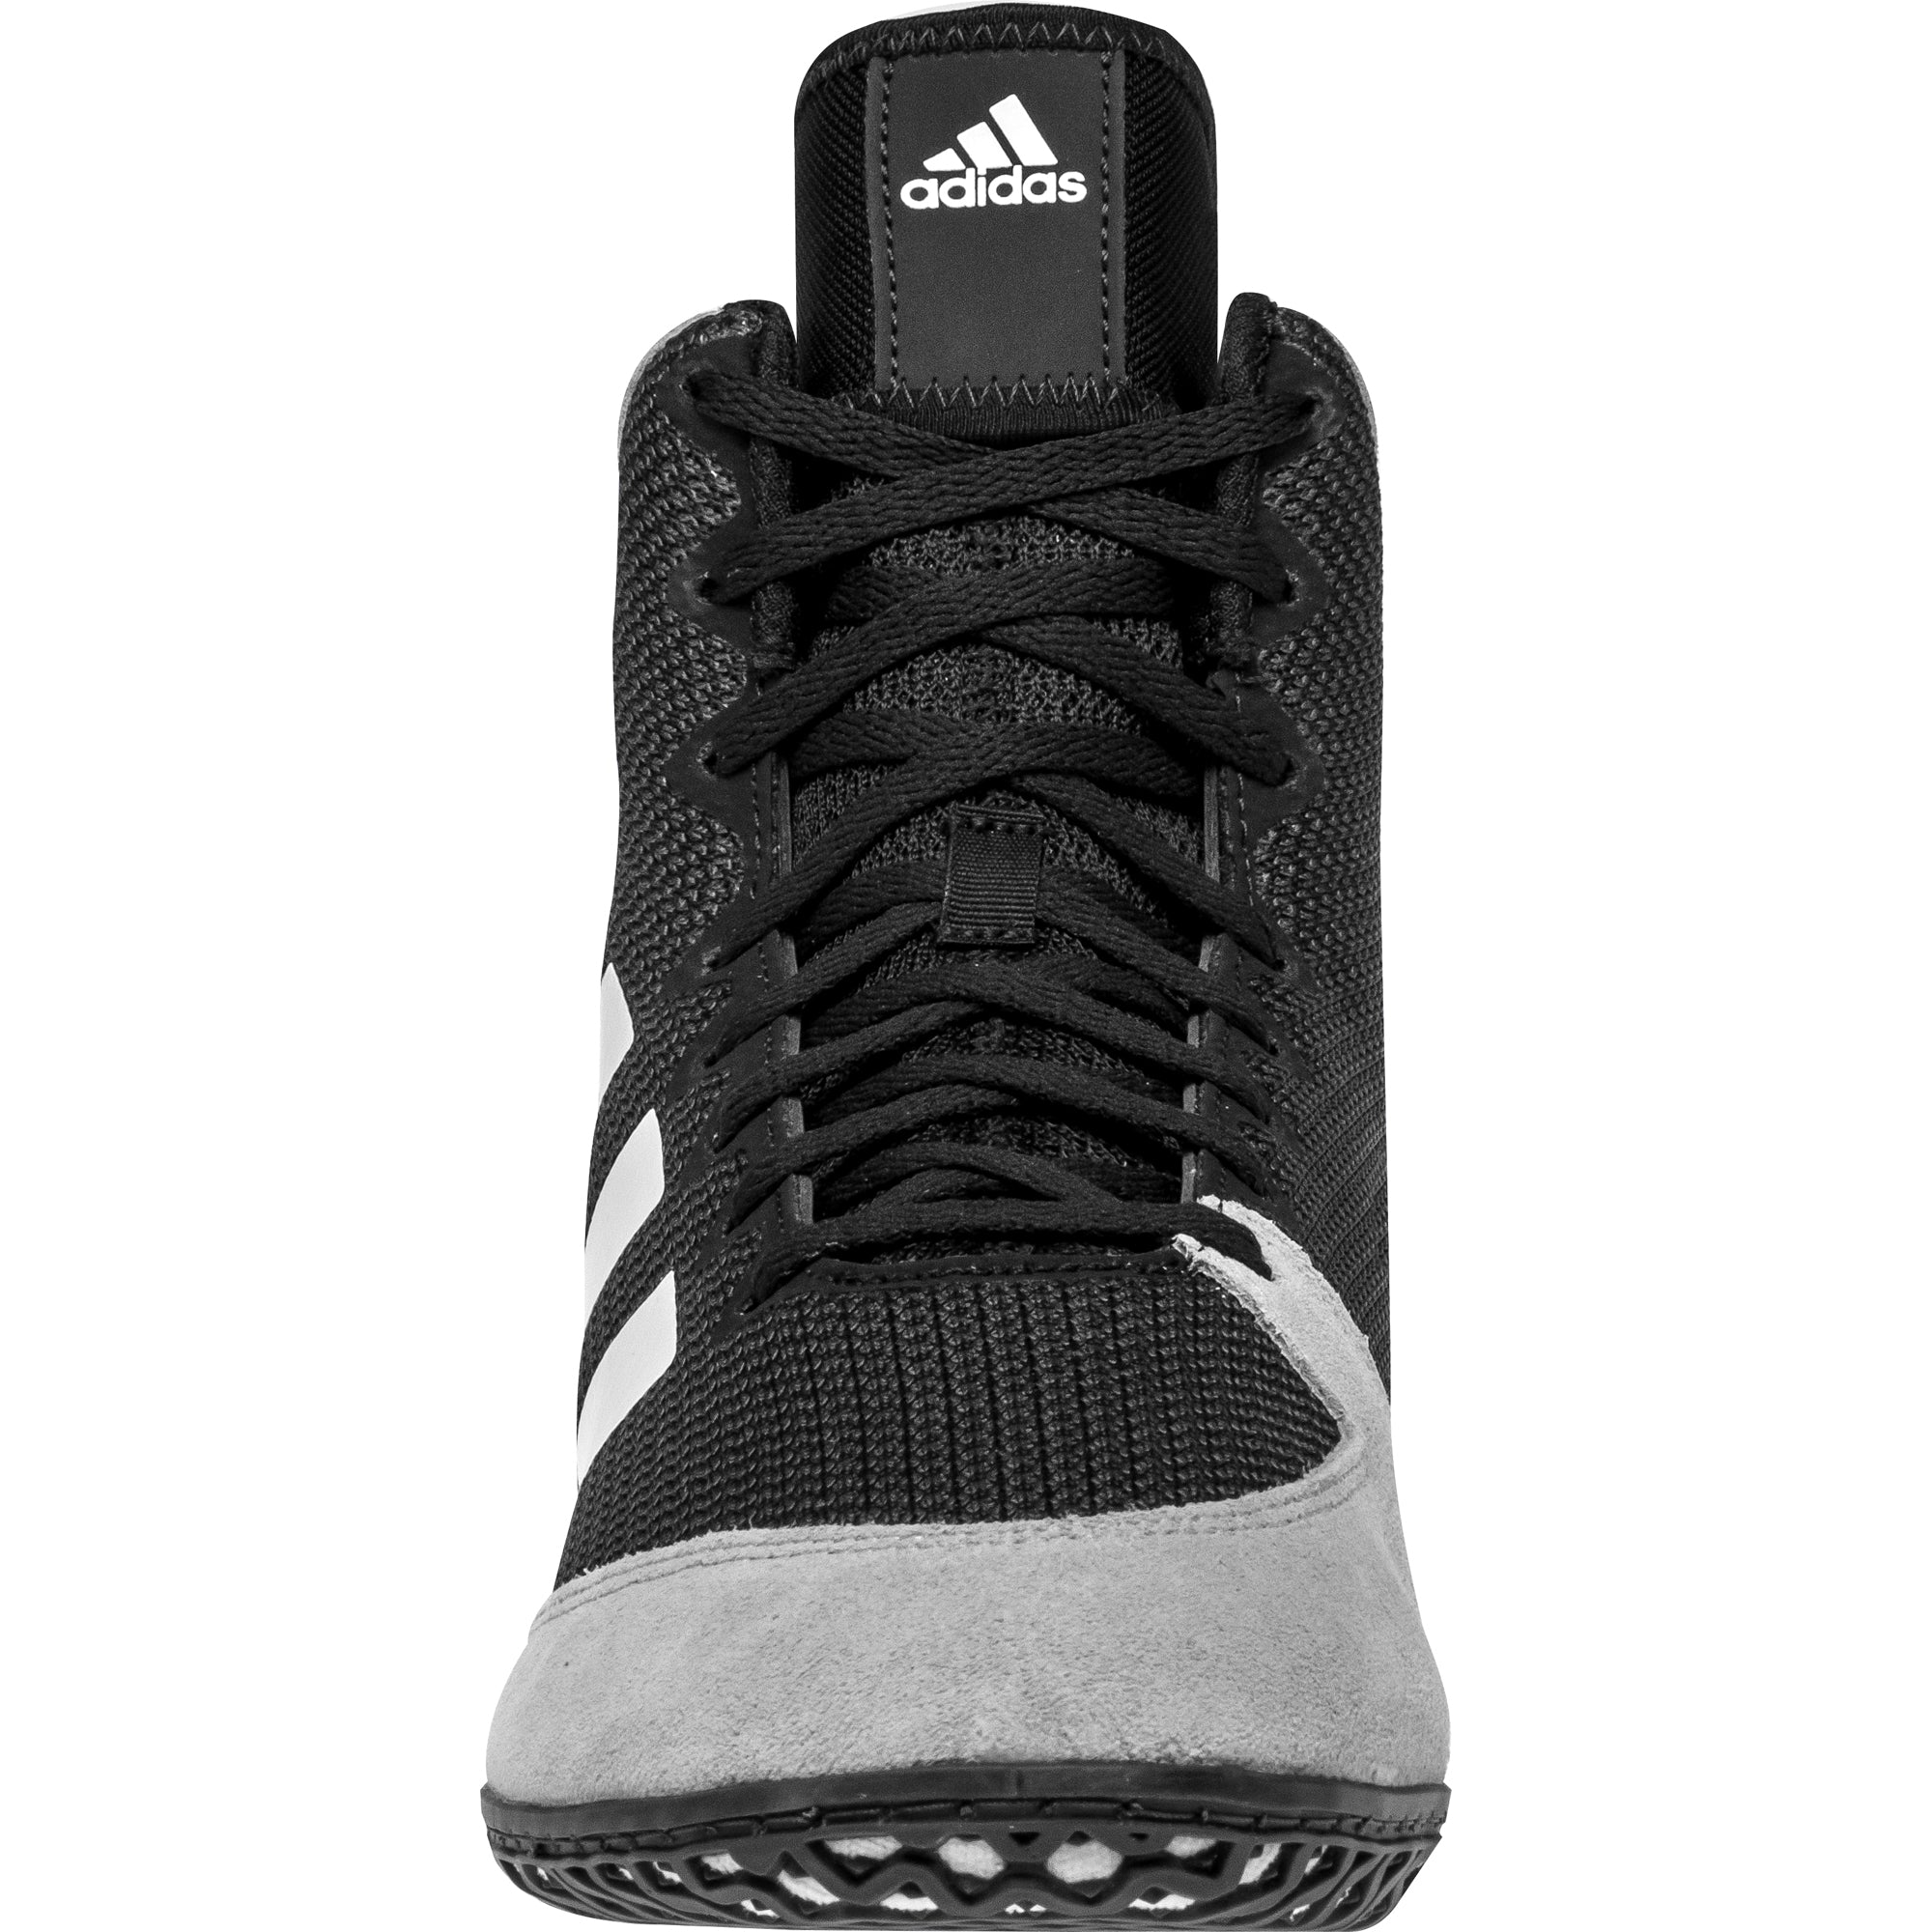 AdidasWrestling on X: Gifting made easy with the Mat Wizard 5 Wrestling  Shoes:  #wrestling #matwizard #wrestlingshoes   / X